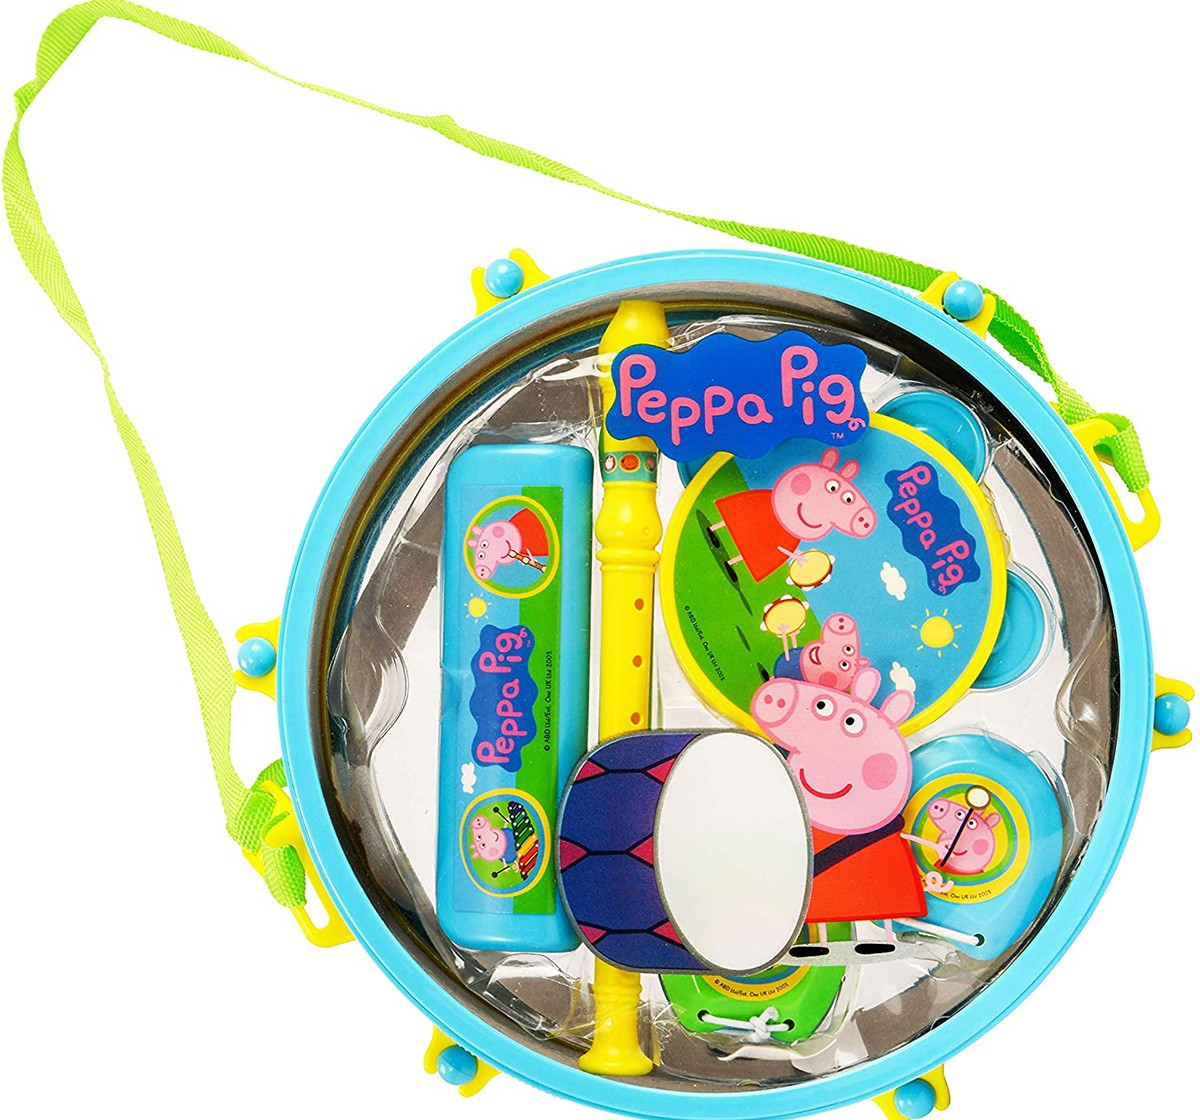 Peppa Pig - Packaway Music Set Other Instruments for Kids age 3Y+ 